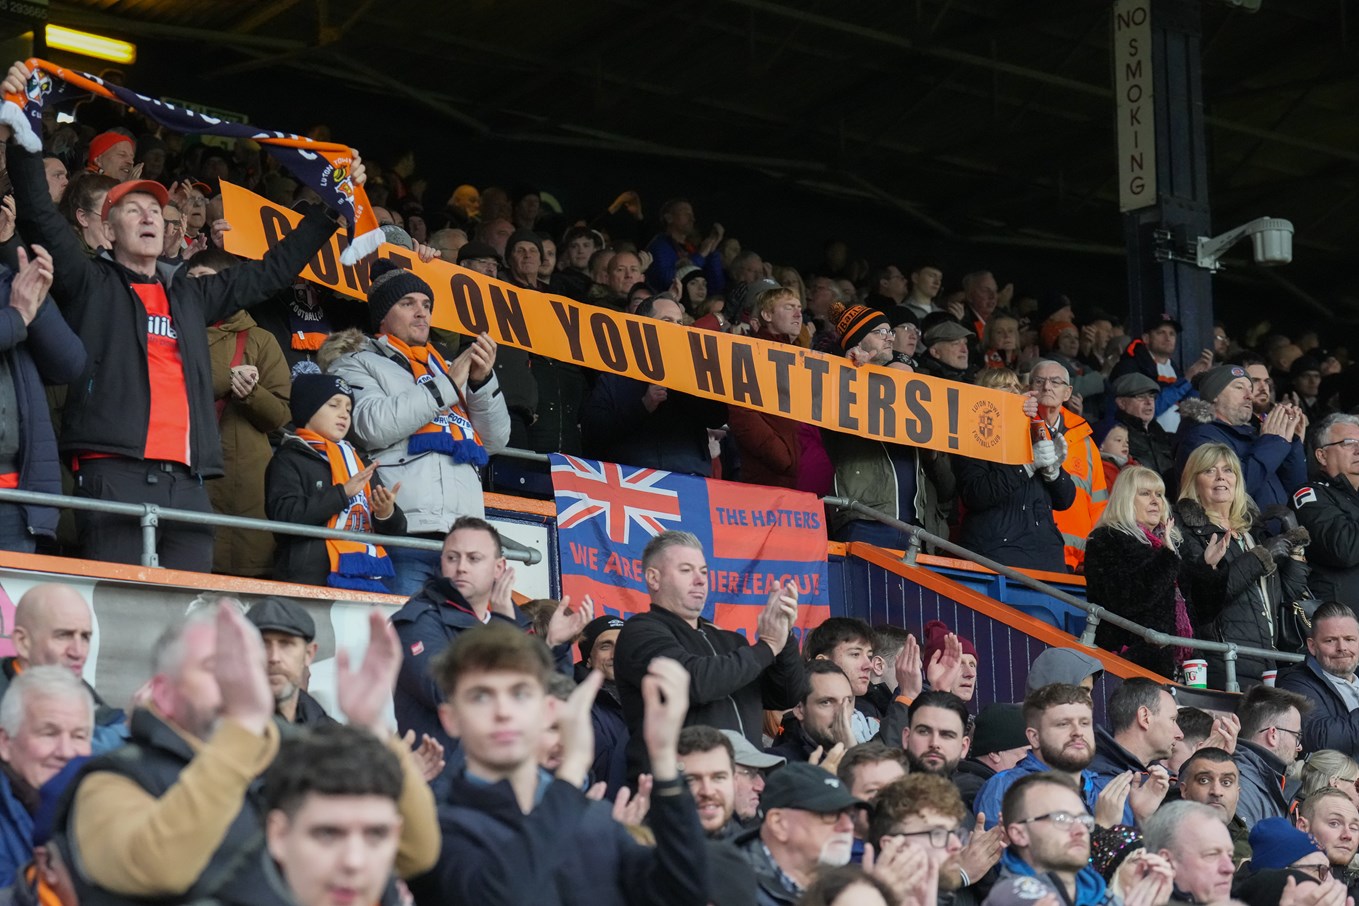 Luton Town fans in the Main Stand clapping with a banner raised which says 'Come on you Hatters!'.